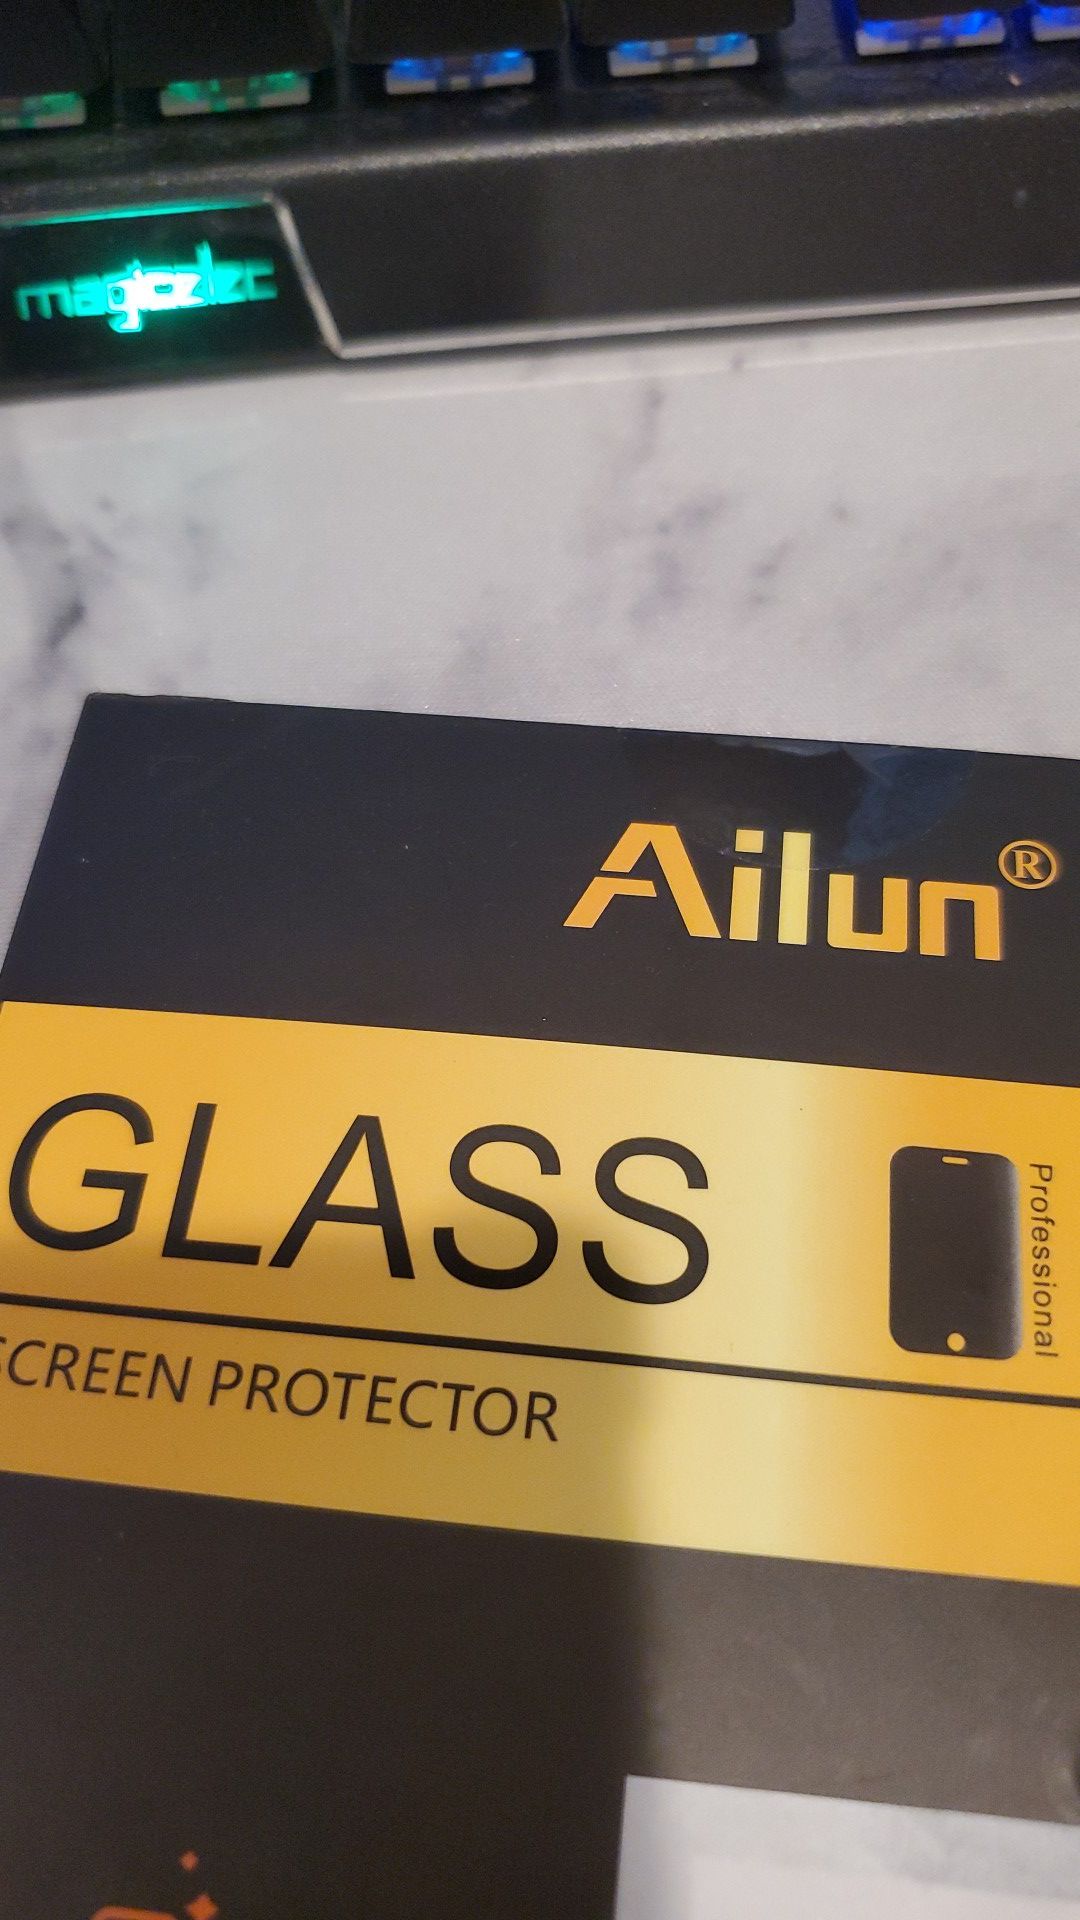 iPhone xr screen protector glass